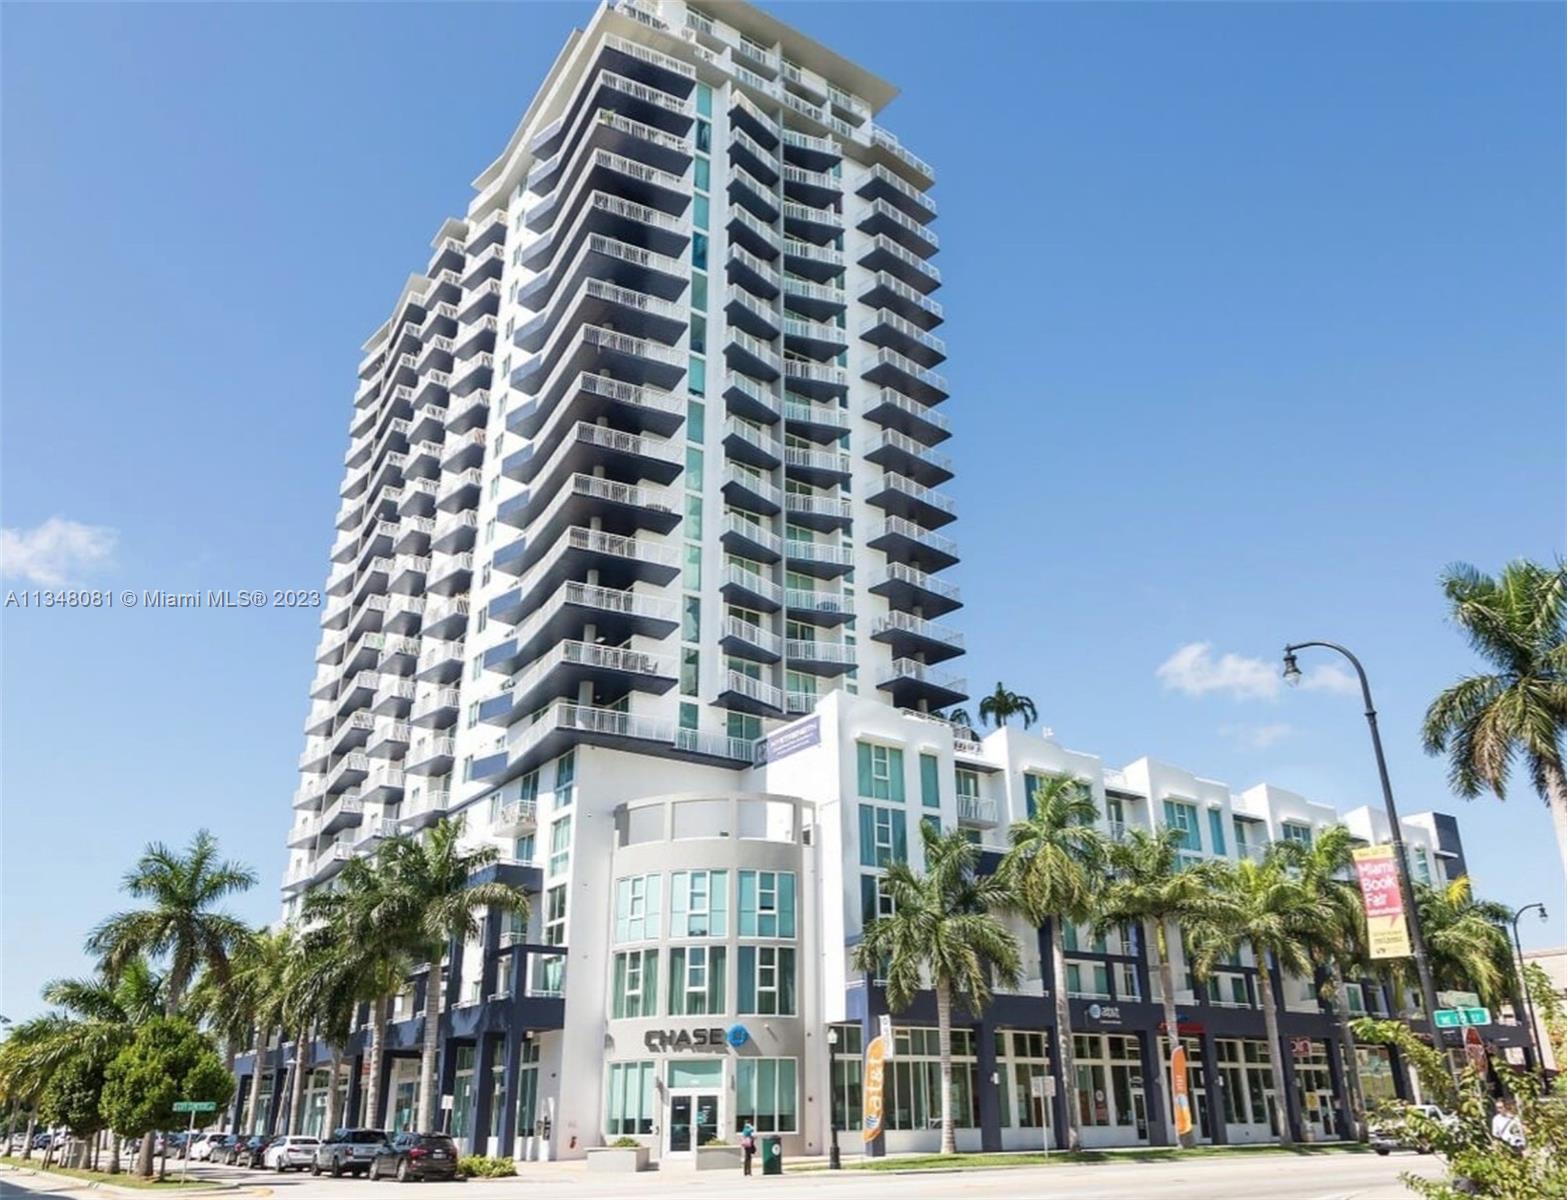 Amazing 1/1 unit with bay and city views. Spacious unit with separate living and dining area. Short distance to the
Preforming Art Center, AAA and Bayside. 5 minutes to South Beach, Coconut Grove and Brickell. Amenities include
gym, pool, Jacuzzi, sunbath deck and Business Center.